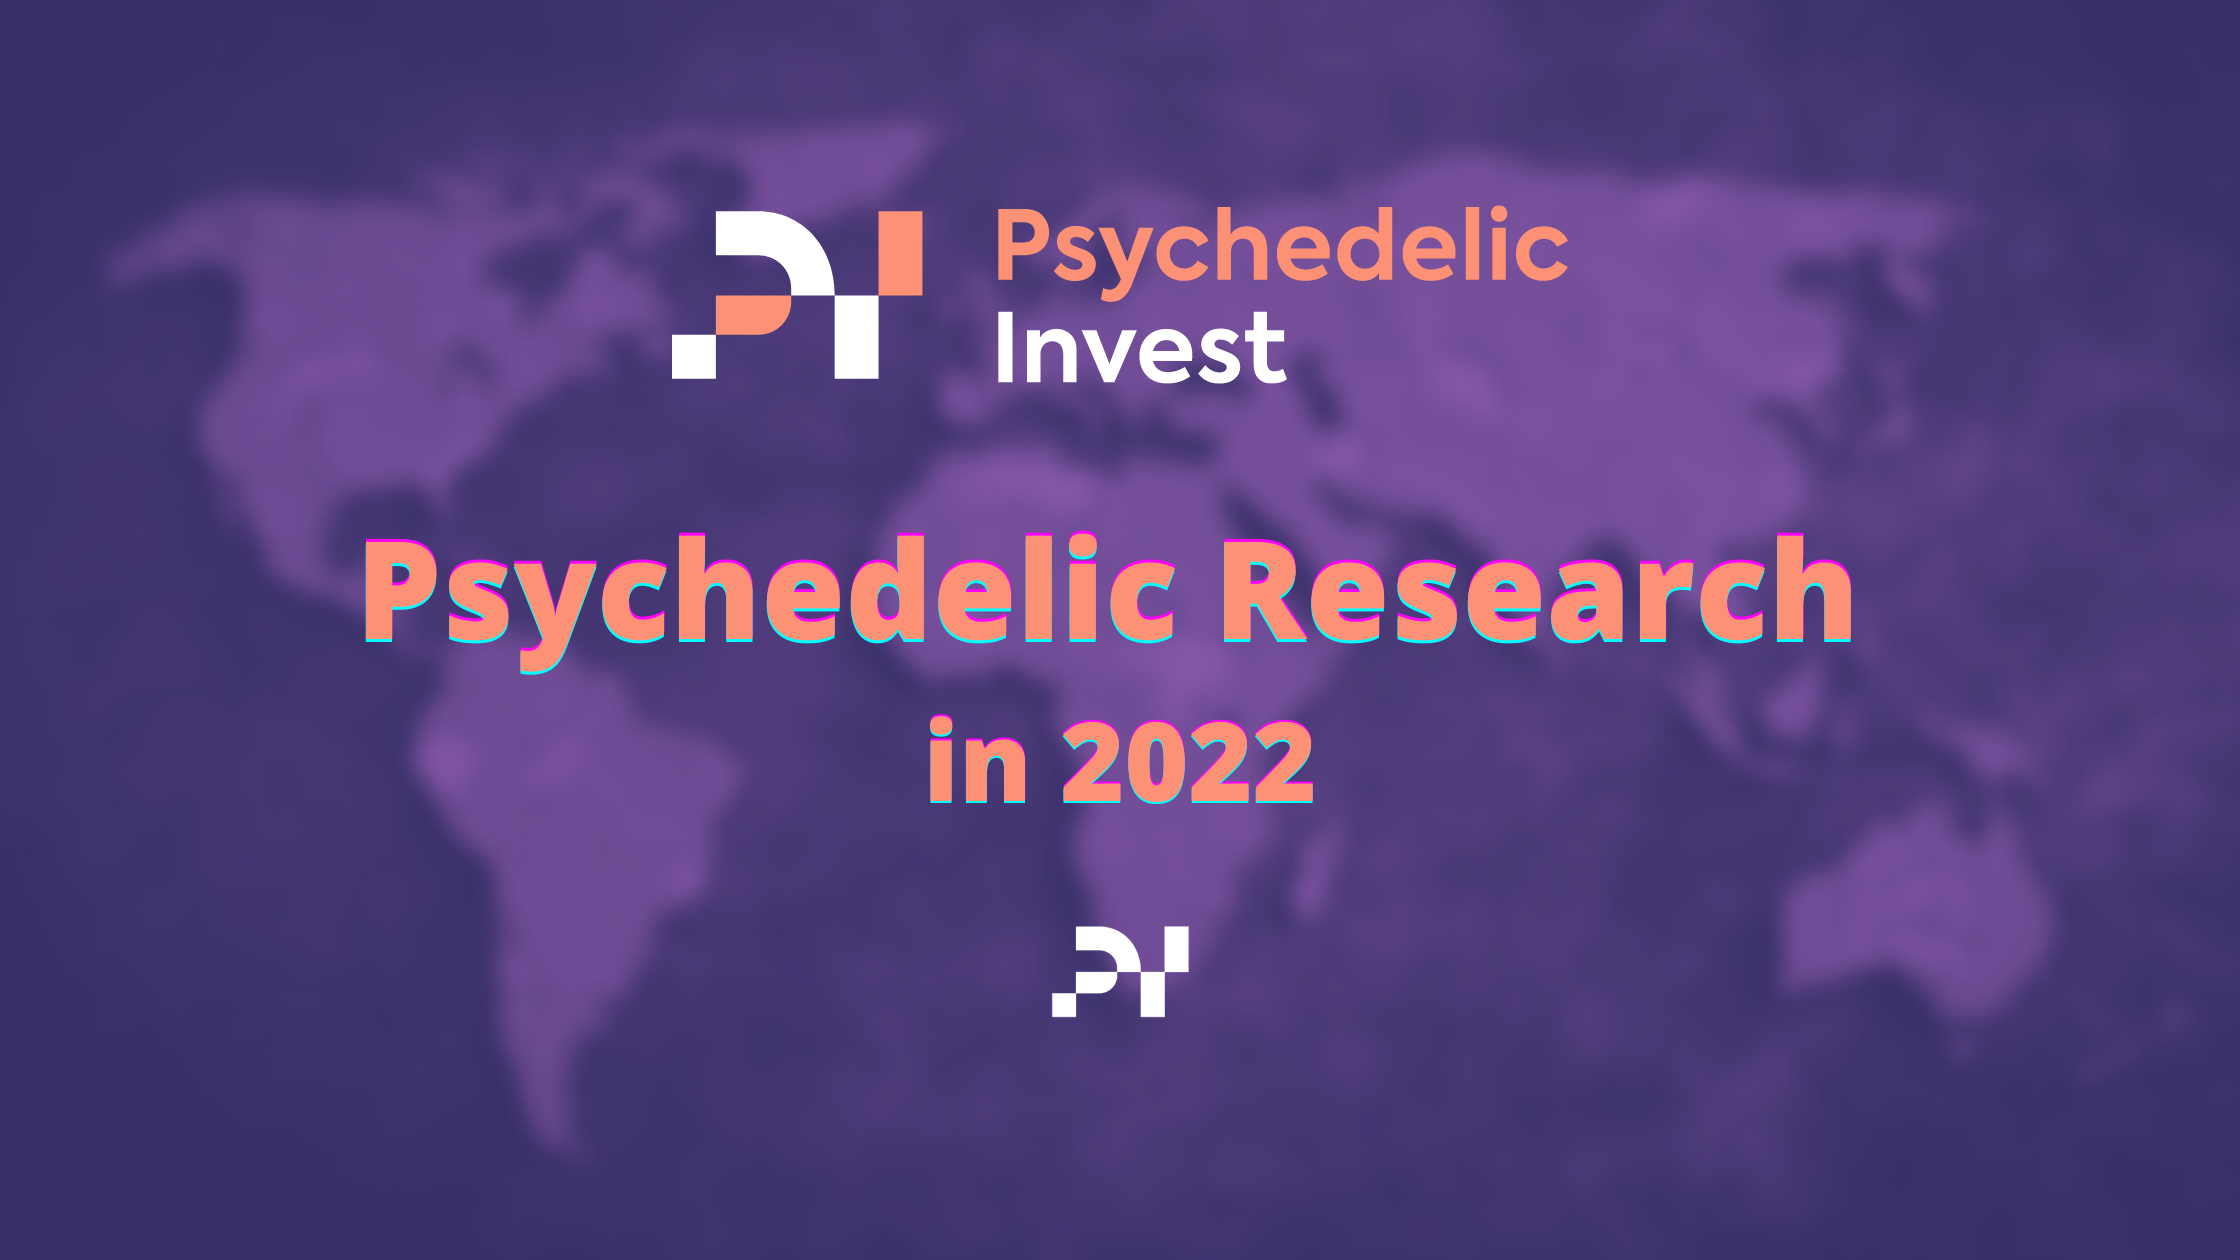 Psychedelic Research in 2022